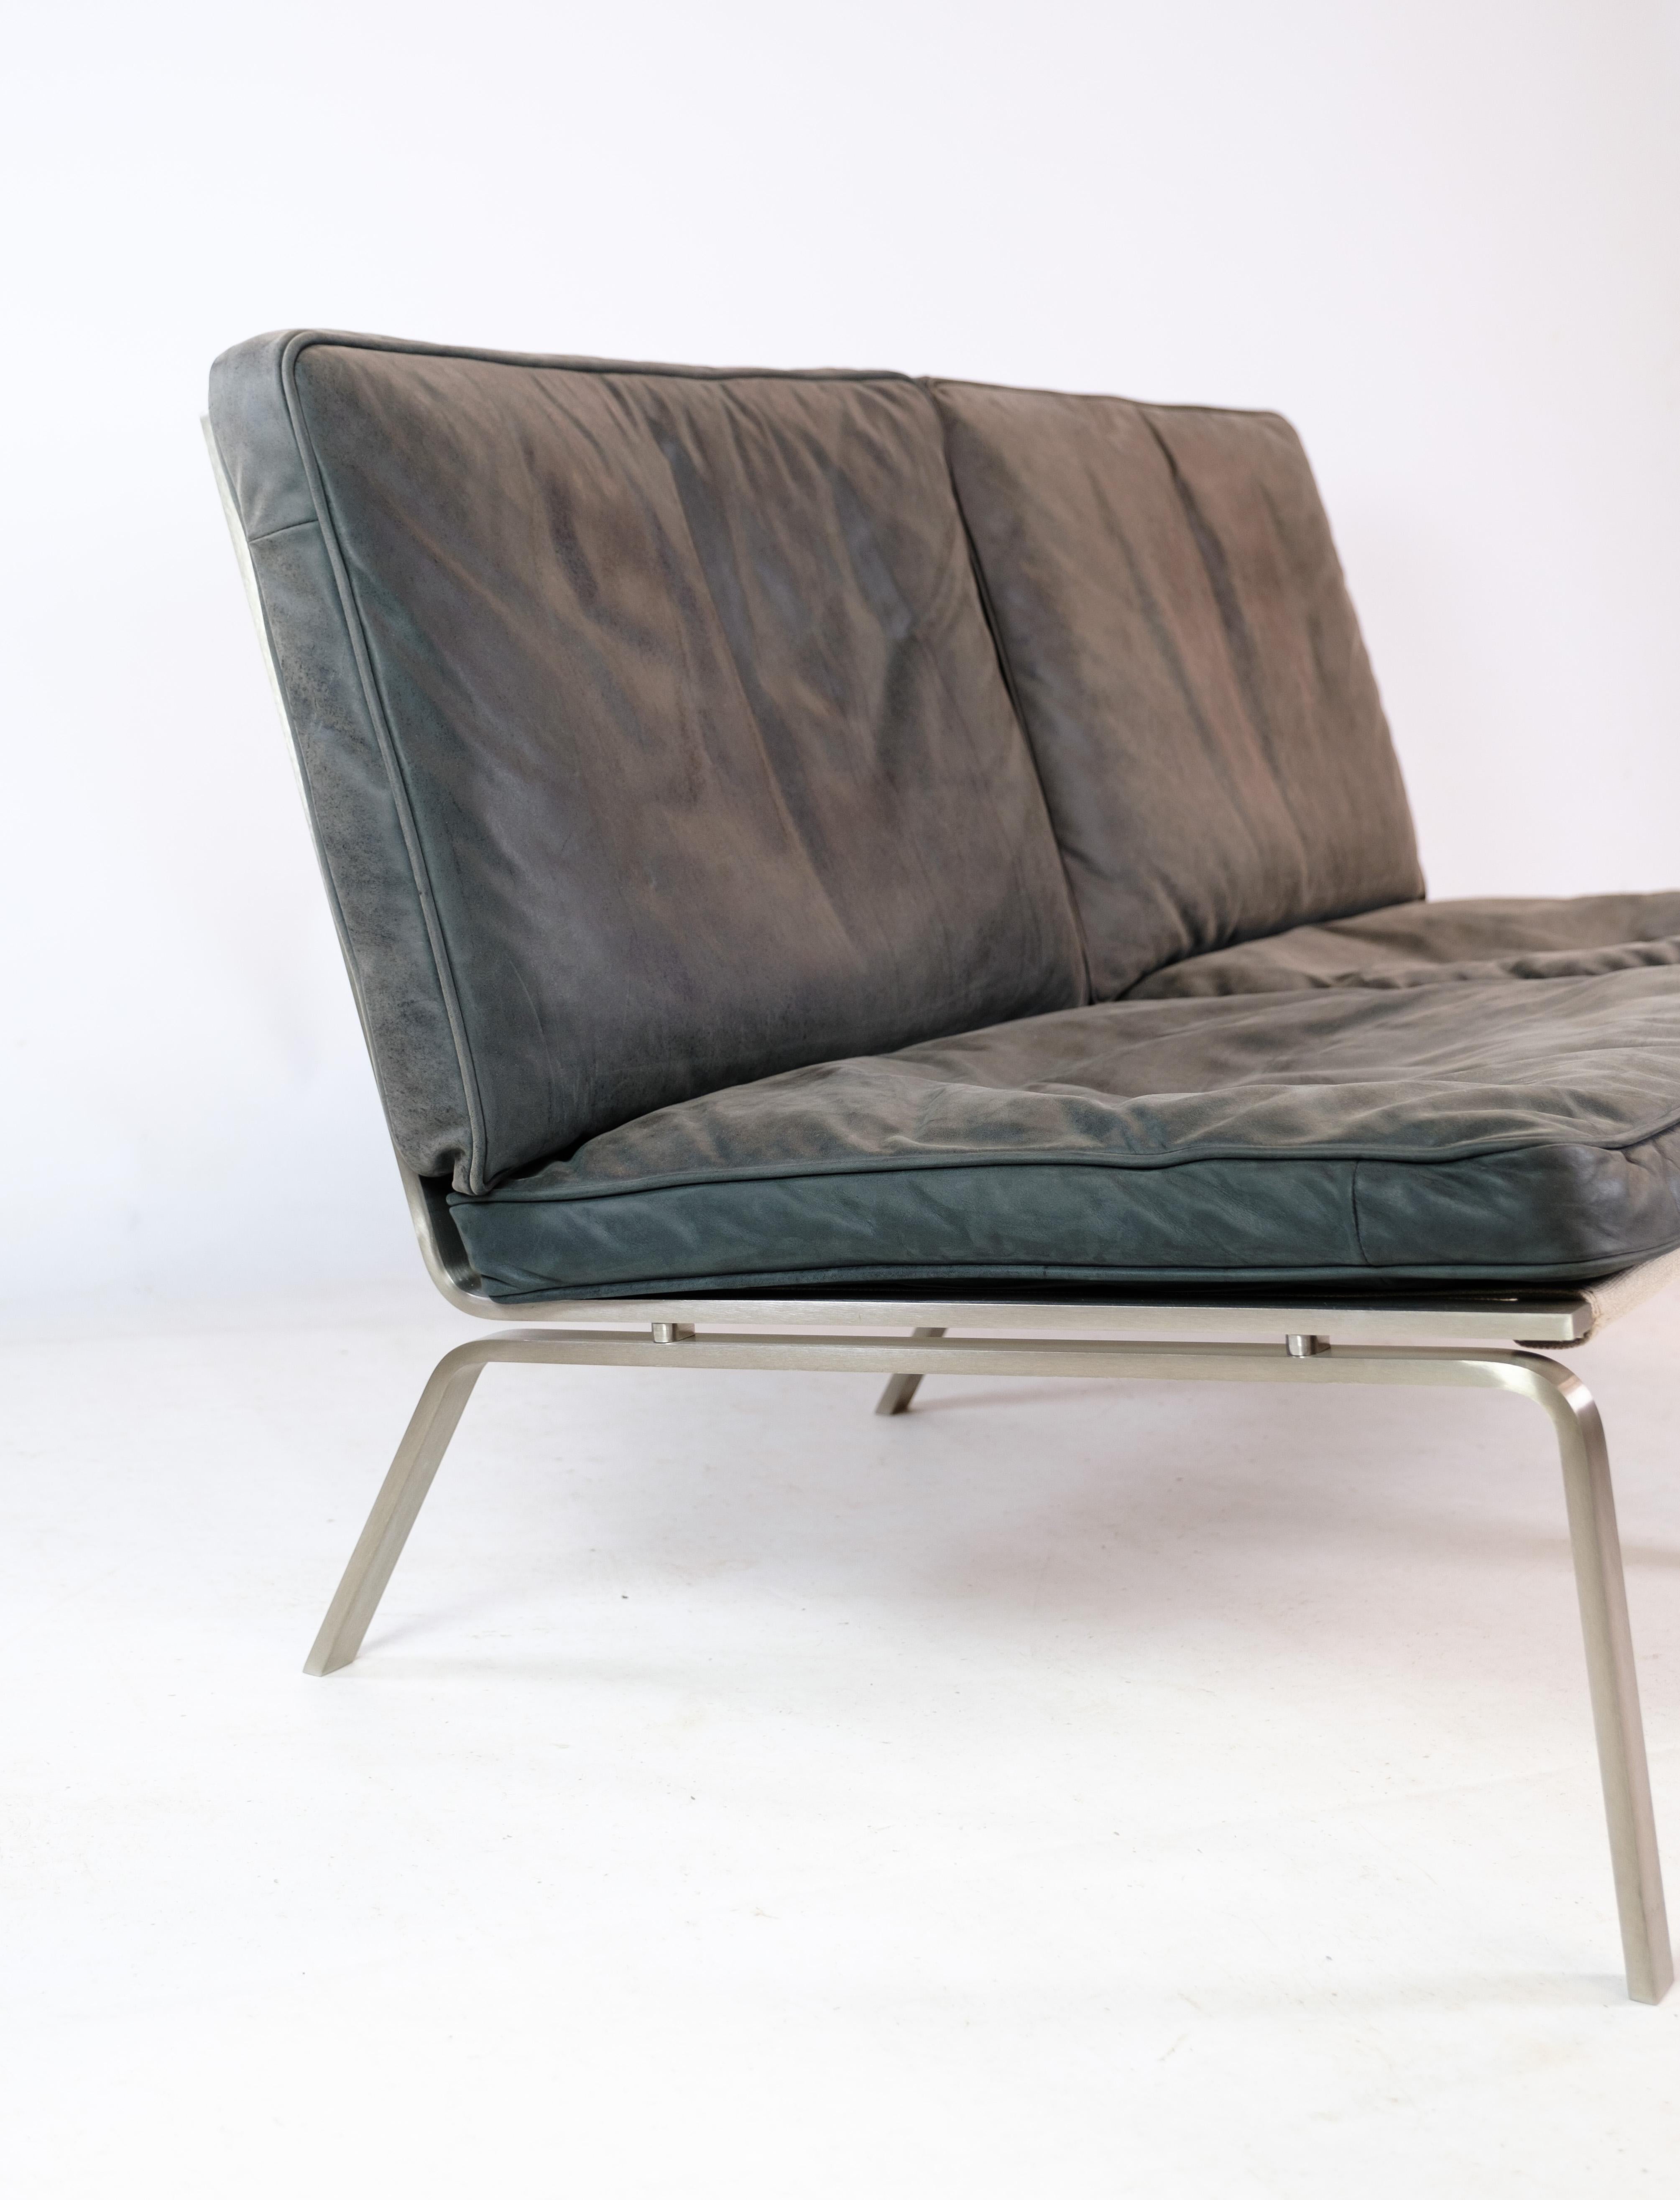 Norr11's 2-seater sofa is a unique design, created with a stainless steel frame and black leather cushions, which gives the sofa a stylish and durable look. This combination of materials makes the sofa both elegant and durable, so you can enjoy it